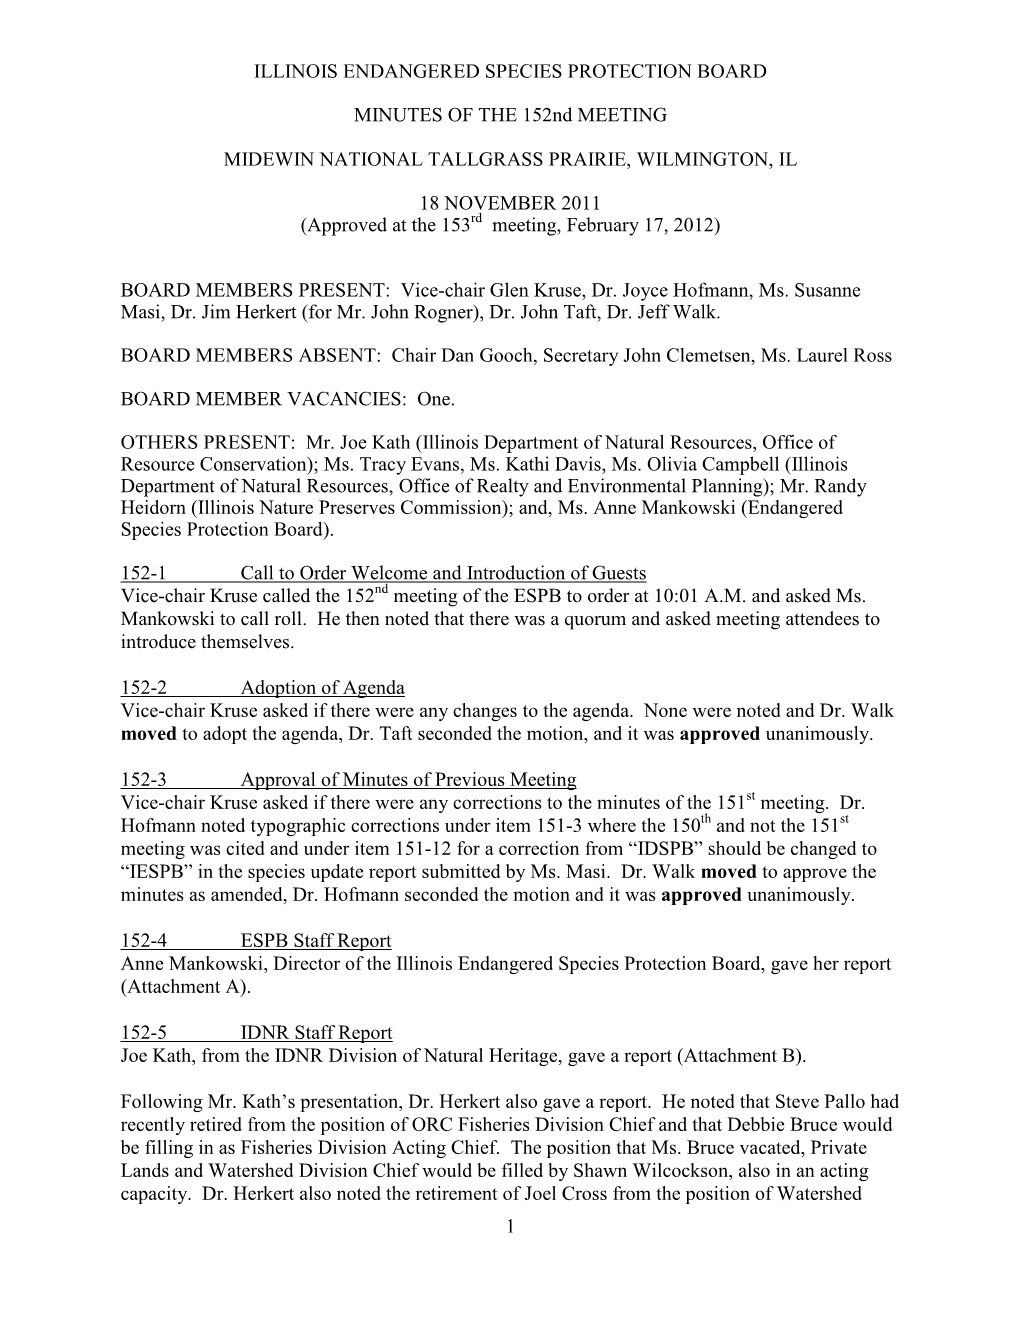 1 Illinois Endangered Species Protection Board Minutes